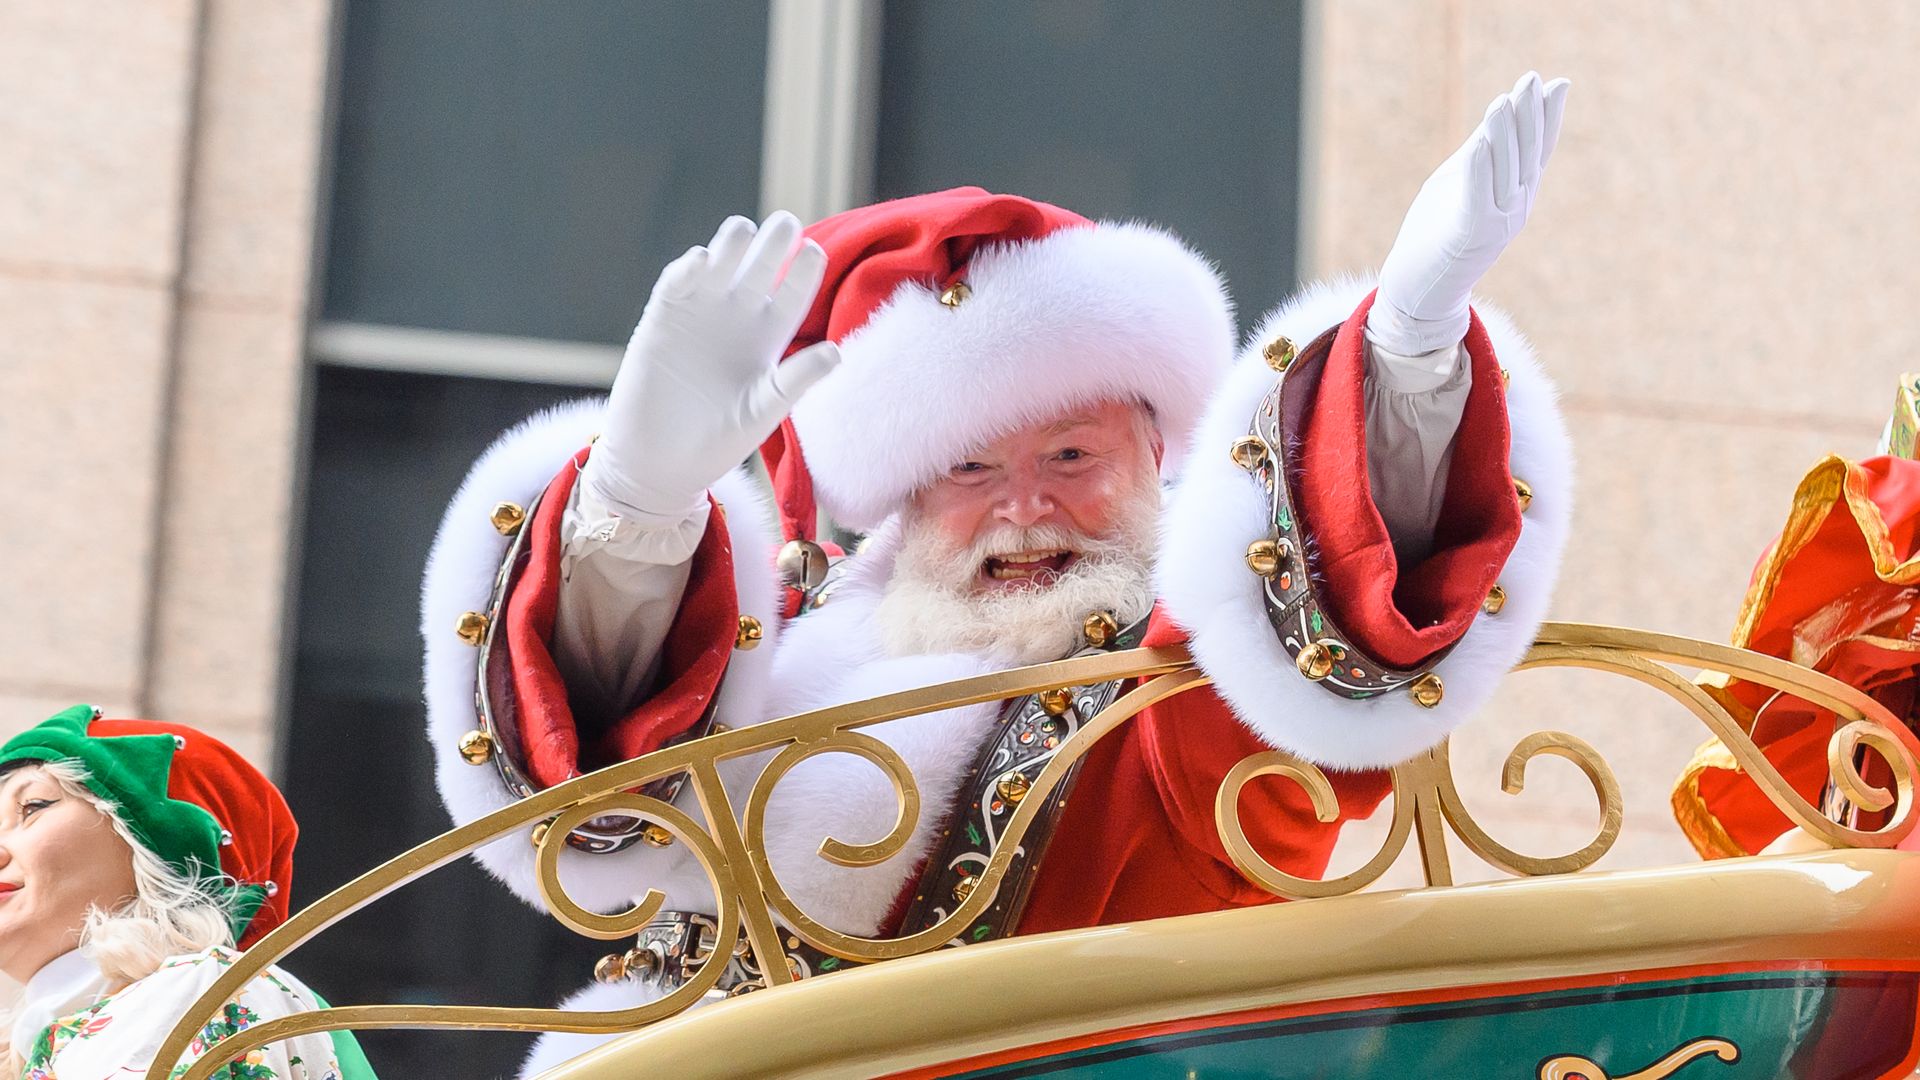 A Santa Clause at the 2019 Macy's Thanksgiving parade. Photo: Noam Galai/Getty Images